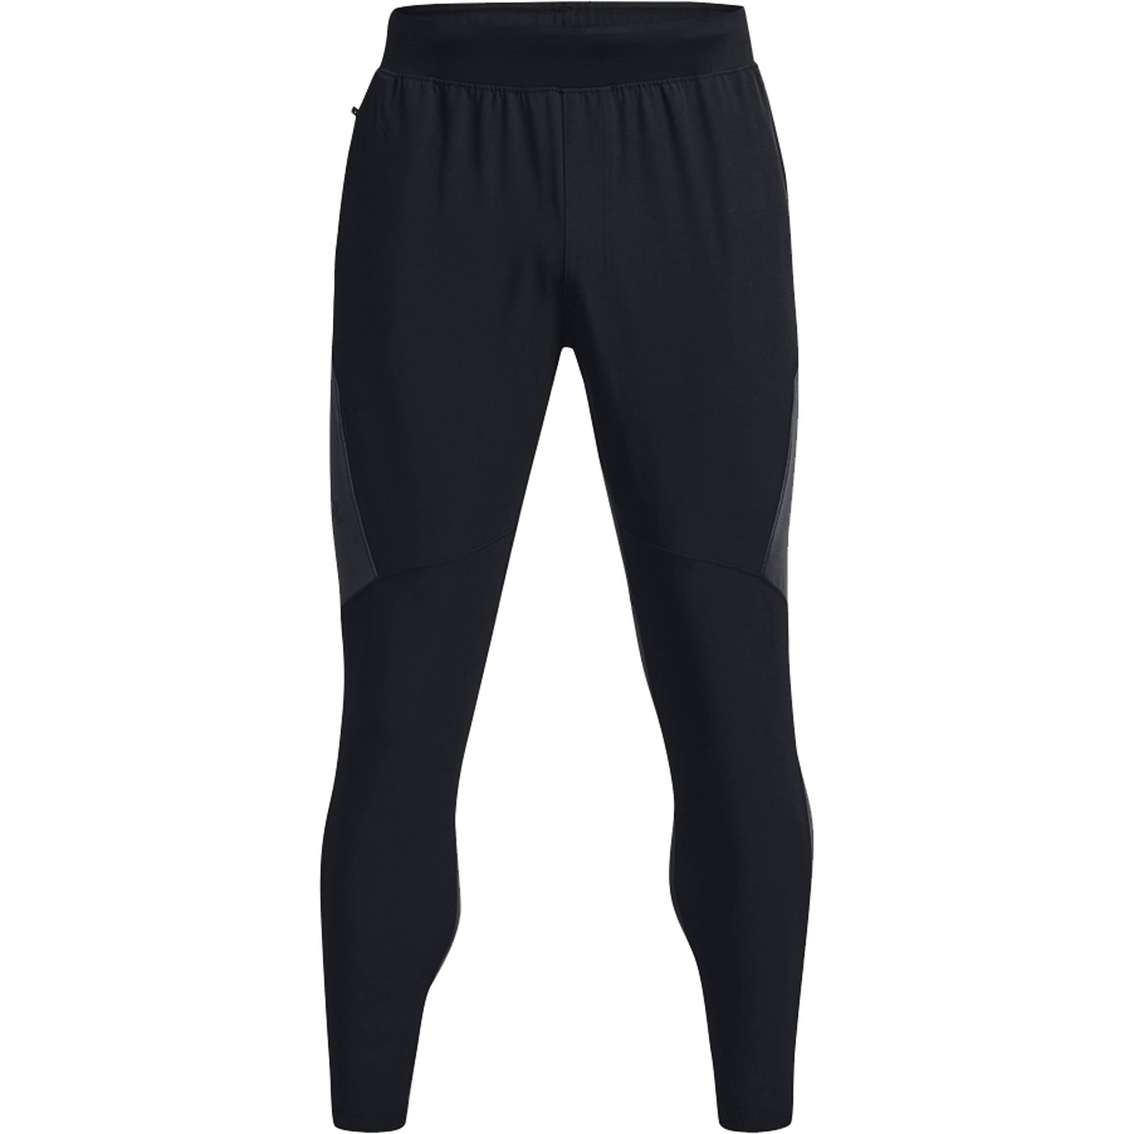 Under Armour Unstoppable Hybrid Pants, Pants, Clothing & Accessories